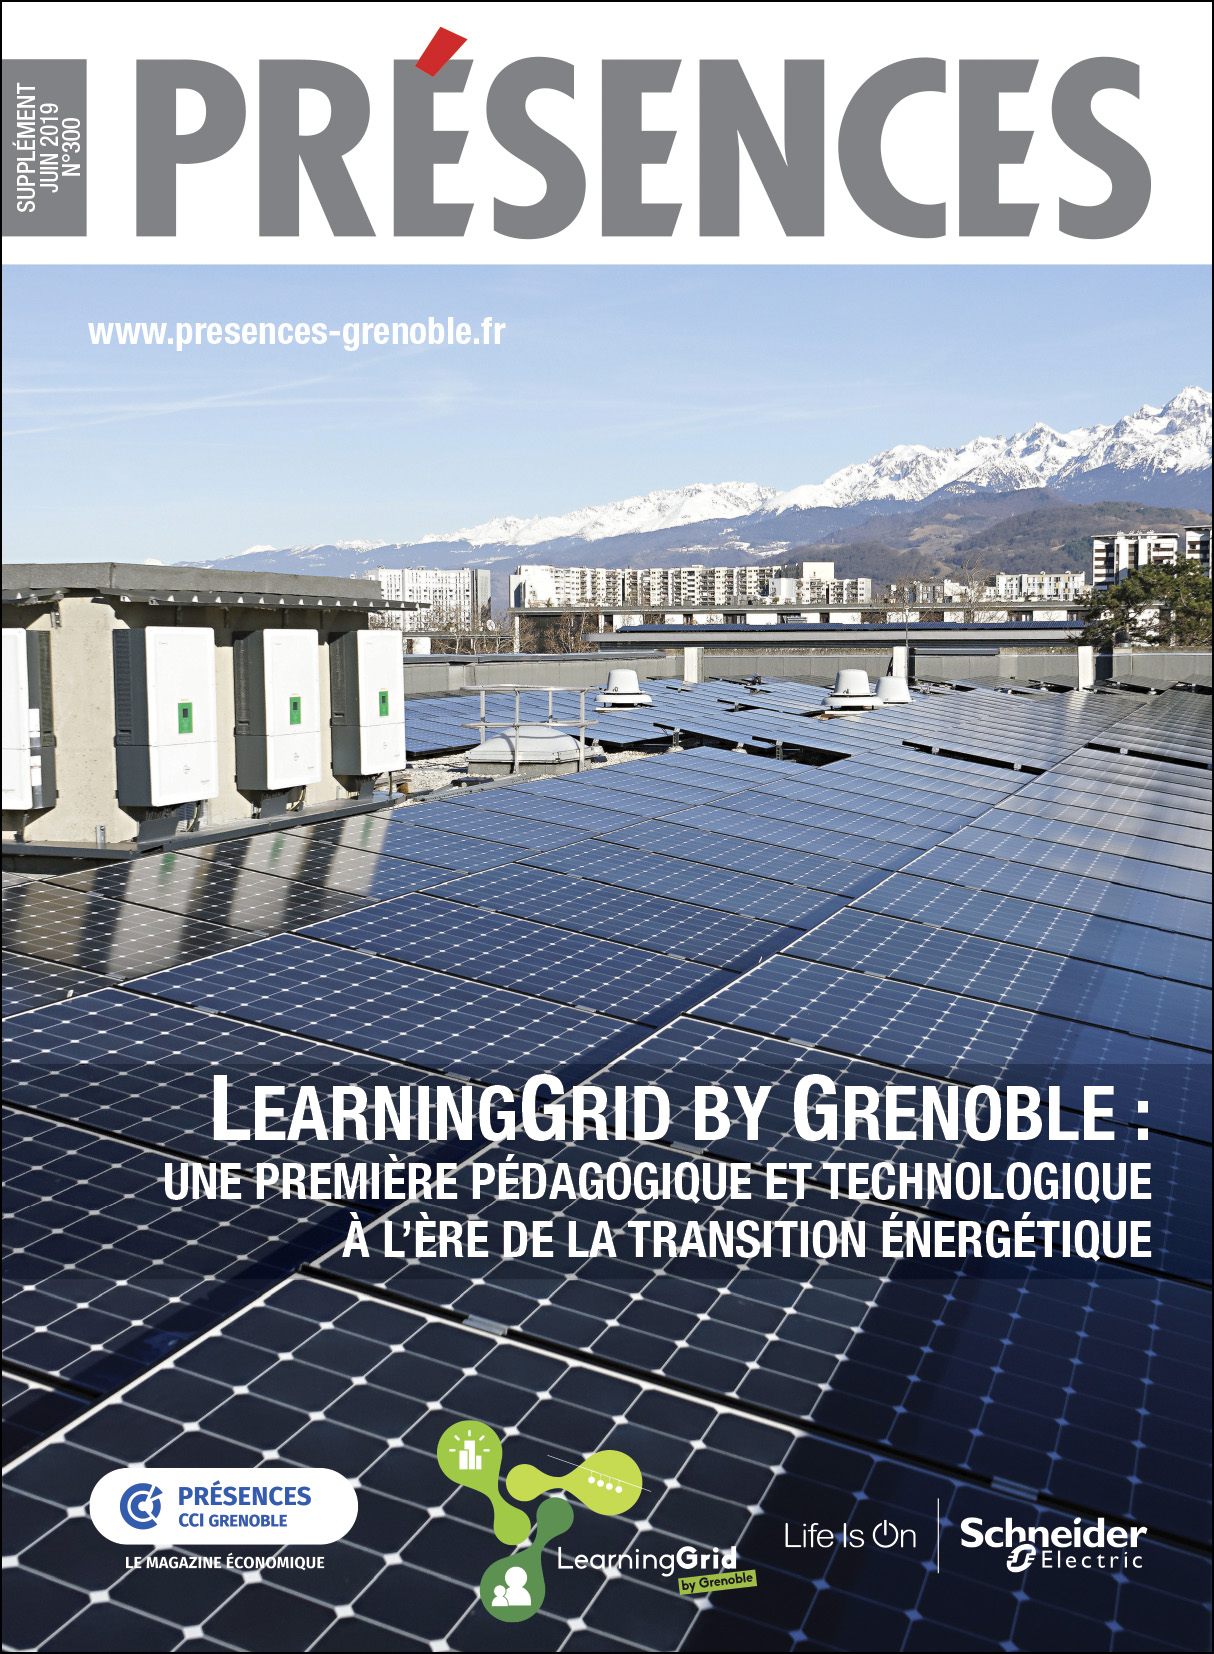 LearningGrid by Grenoble